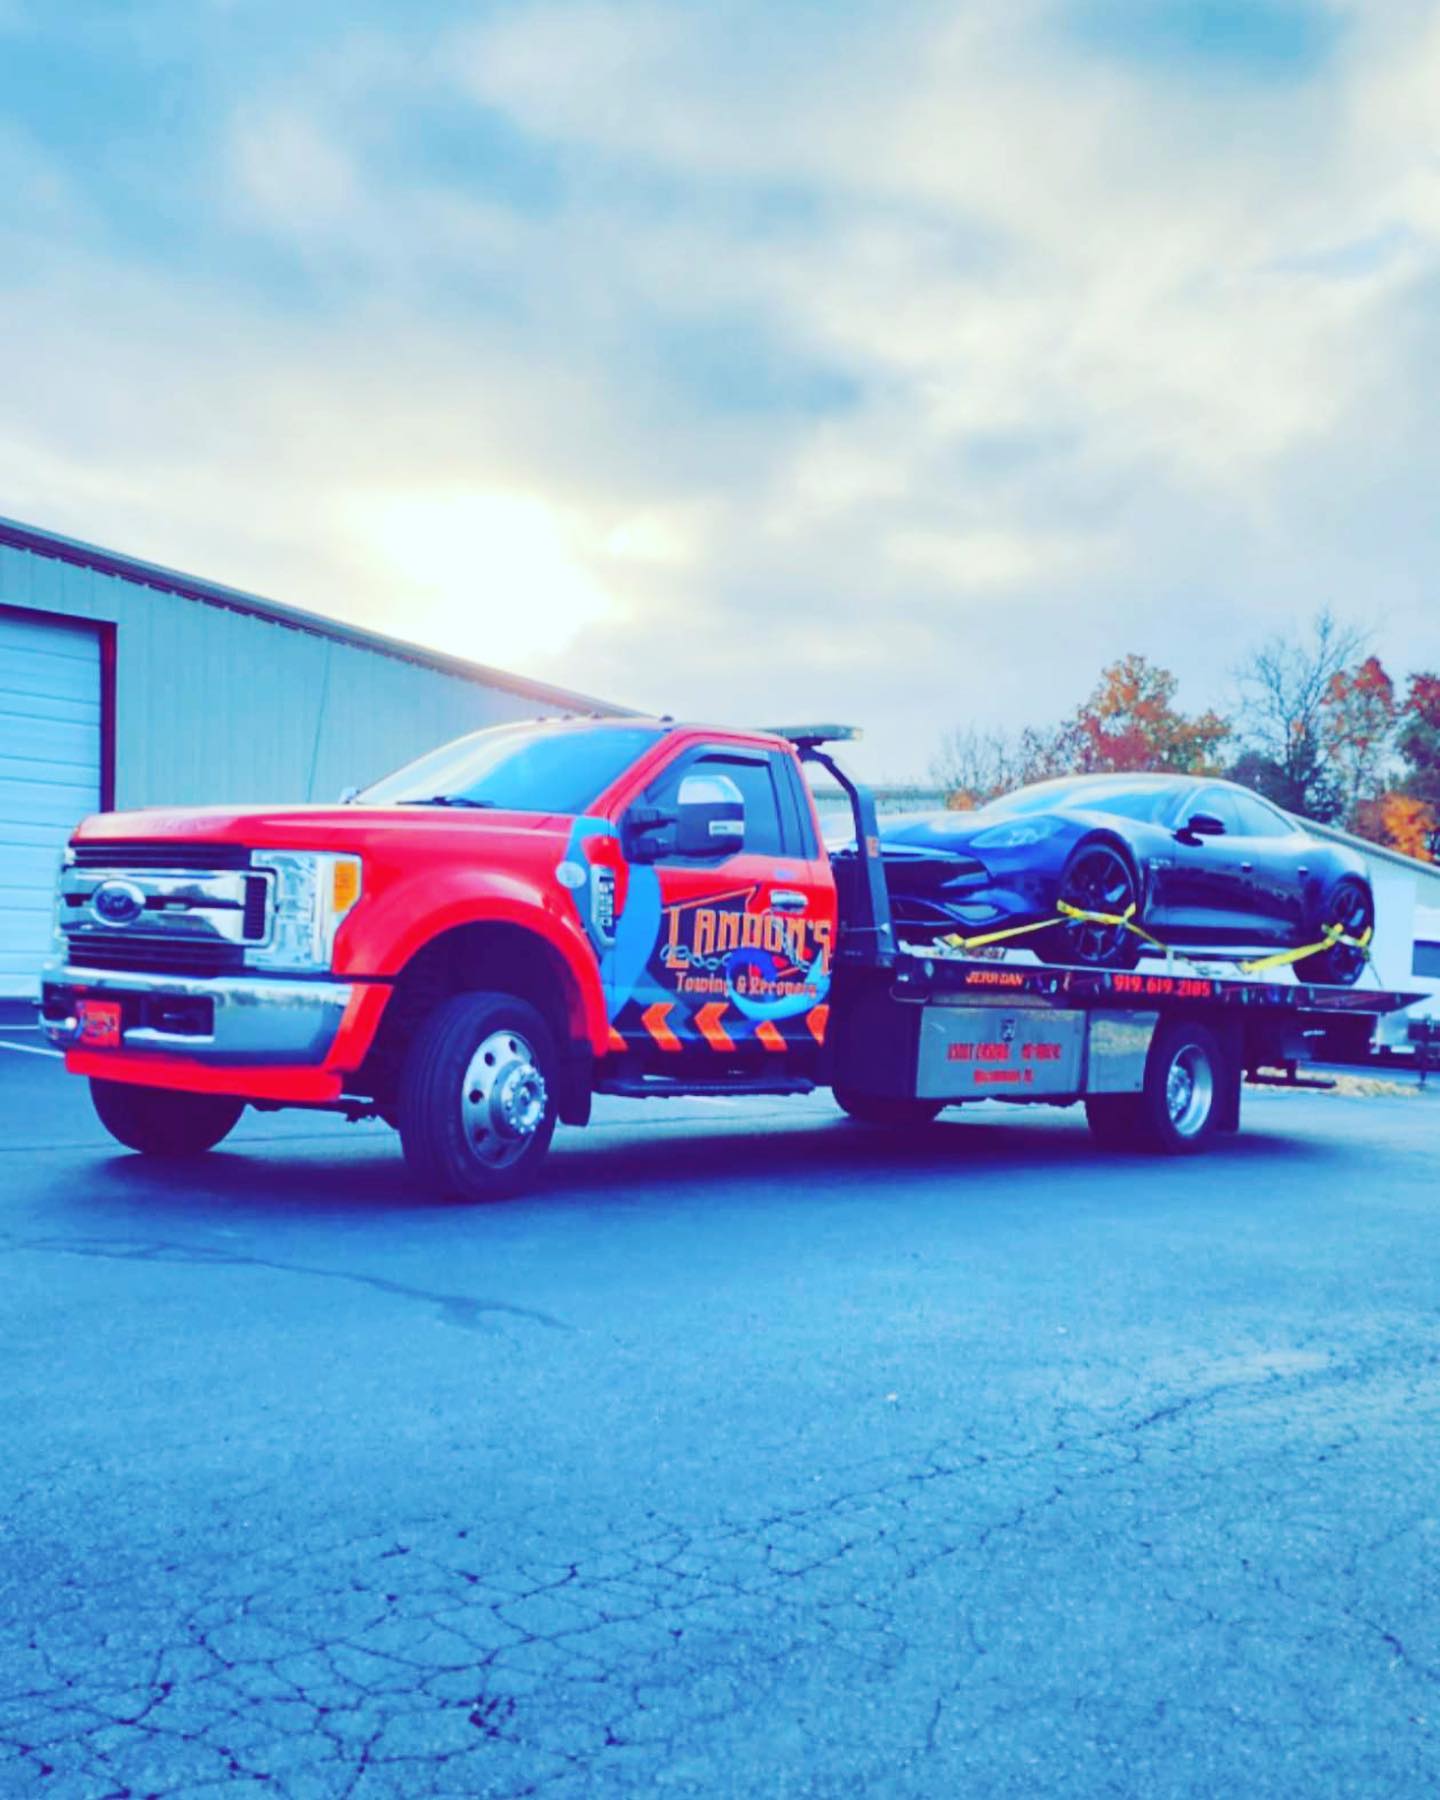 | Landon’s Towing &Amp; Recovery